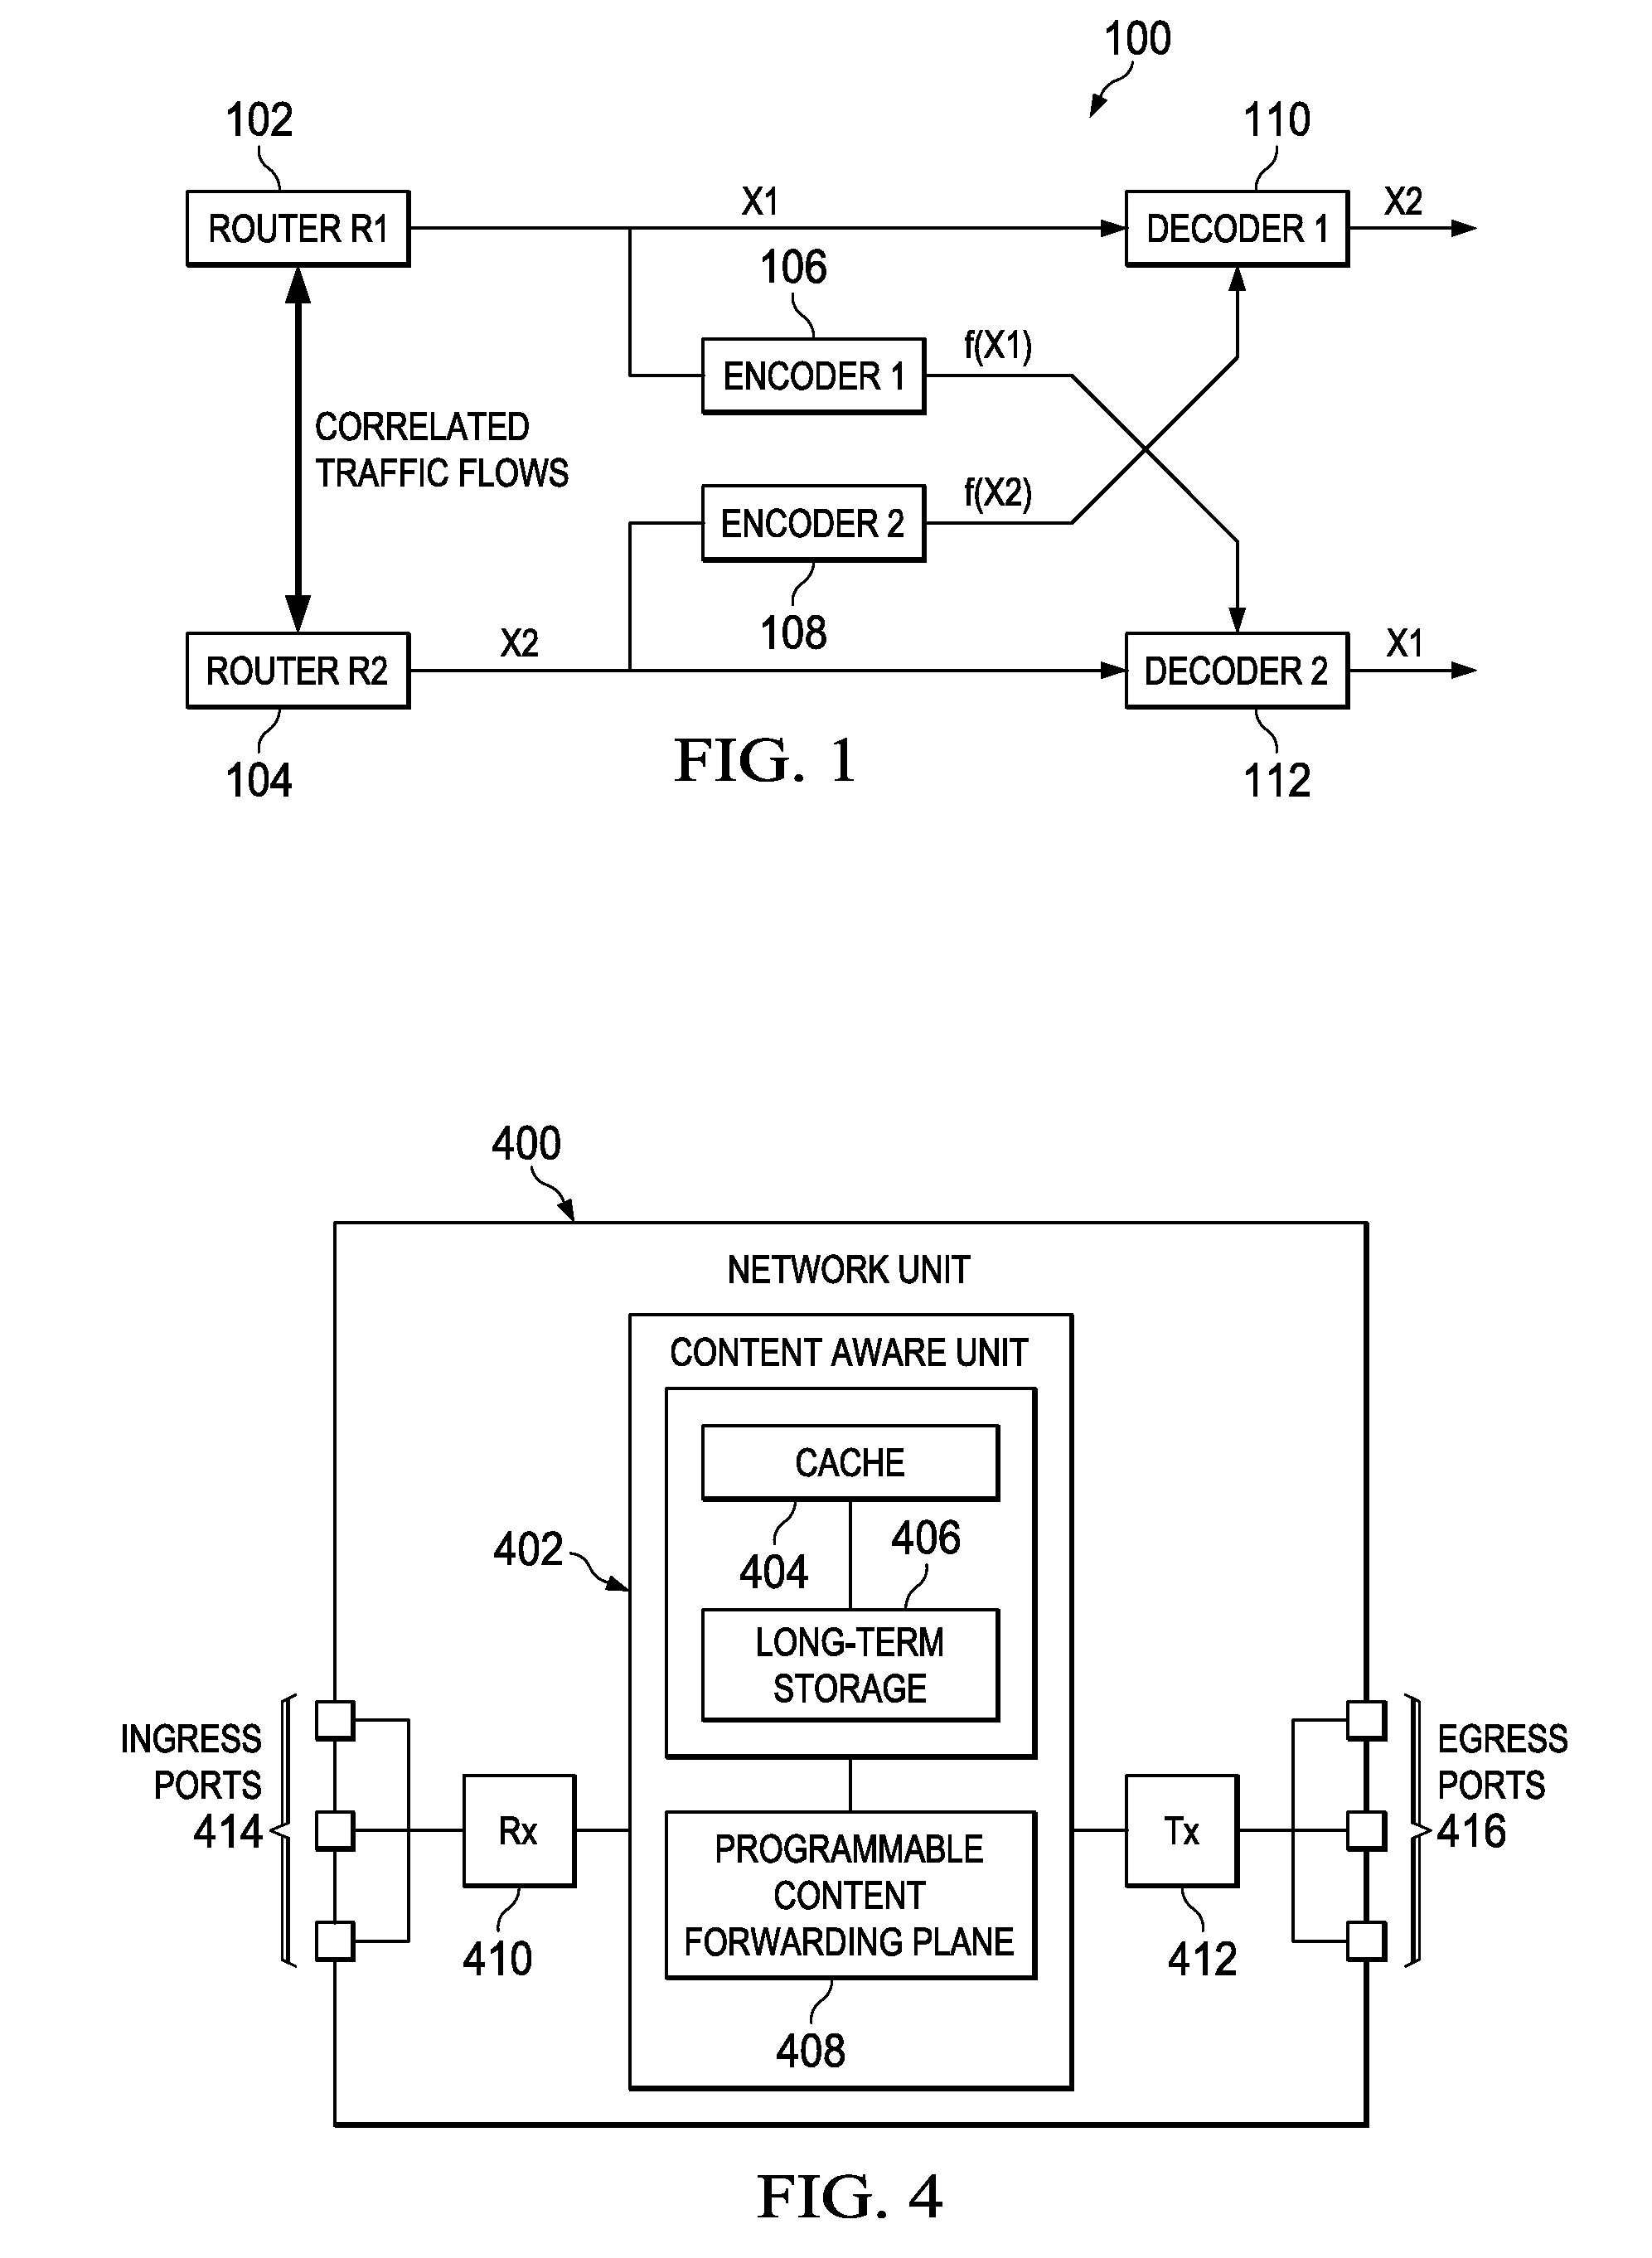 Systems and methods for synchronizing content tables between routers